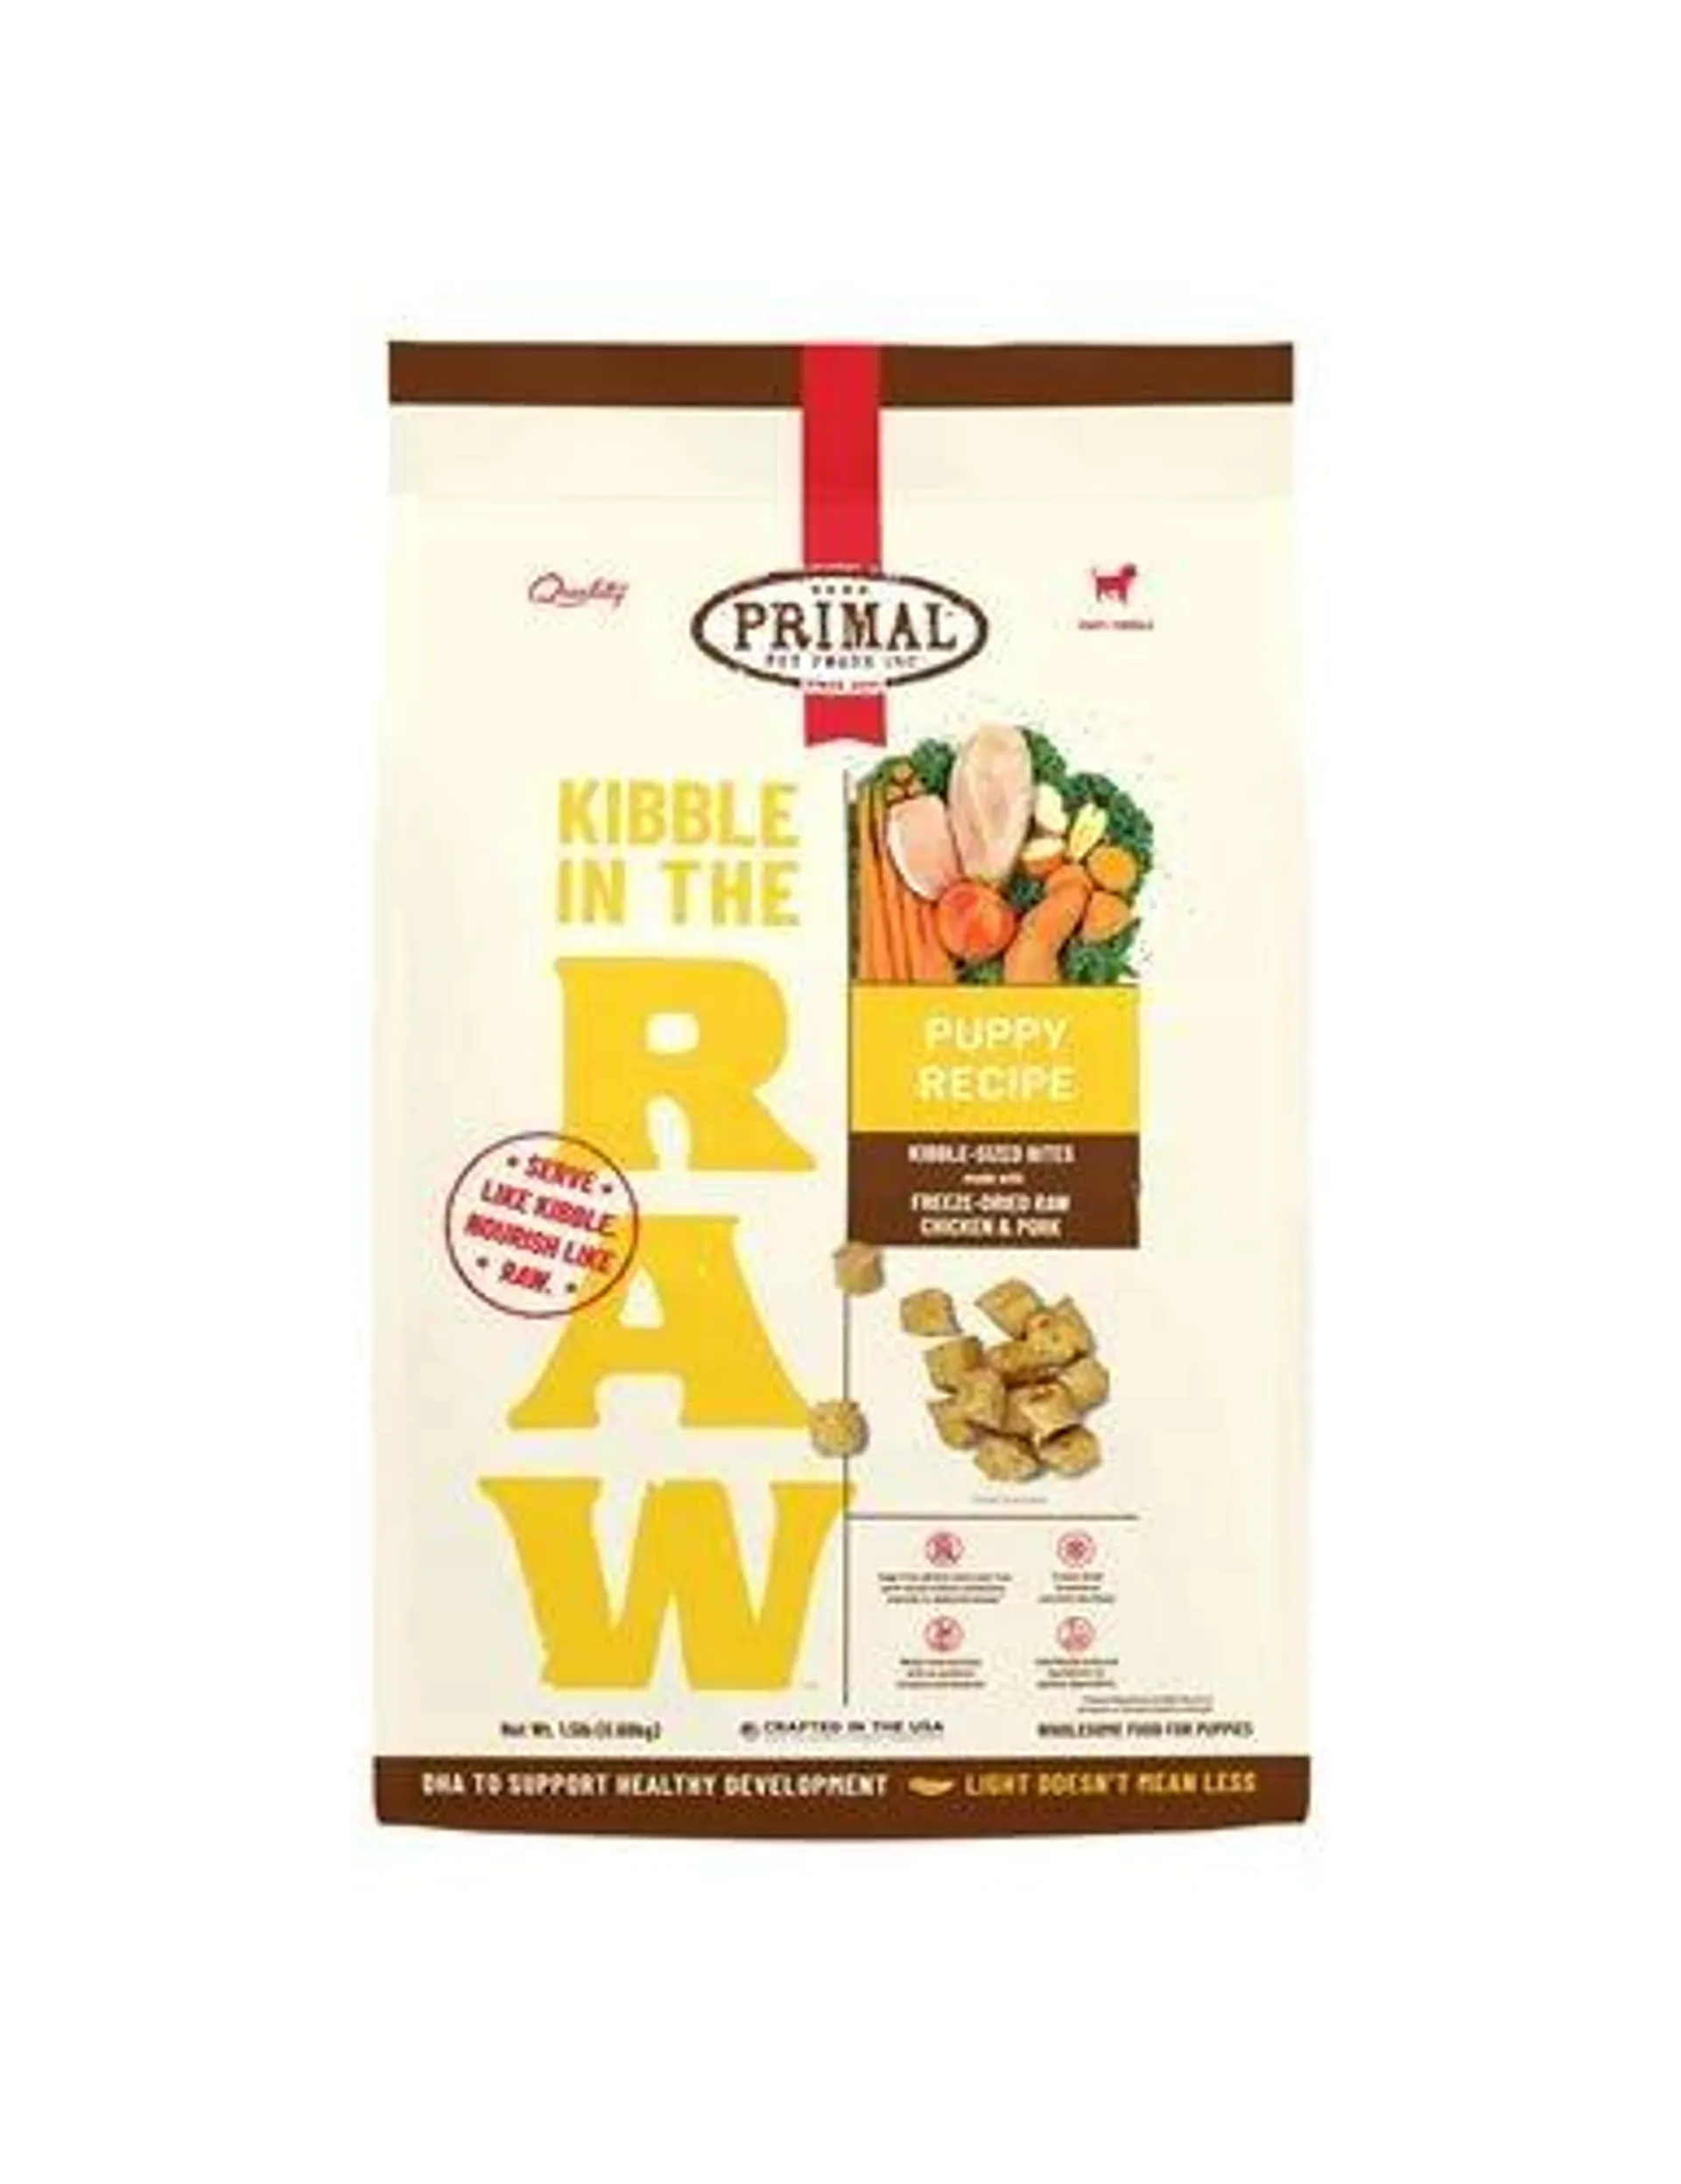 Primal Pet Foods Puppy Kibble in the Raw Dog Food, Chicken Recipe, 1.5 Pounds